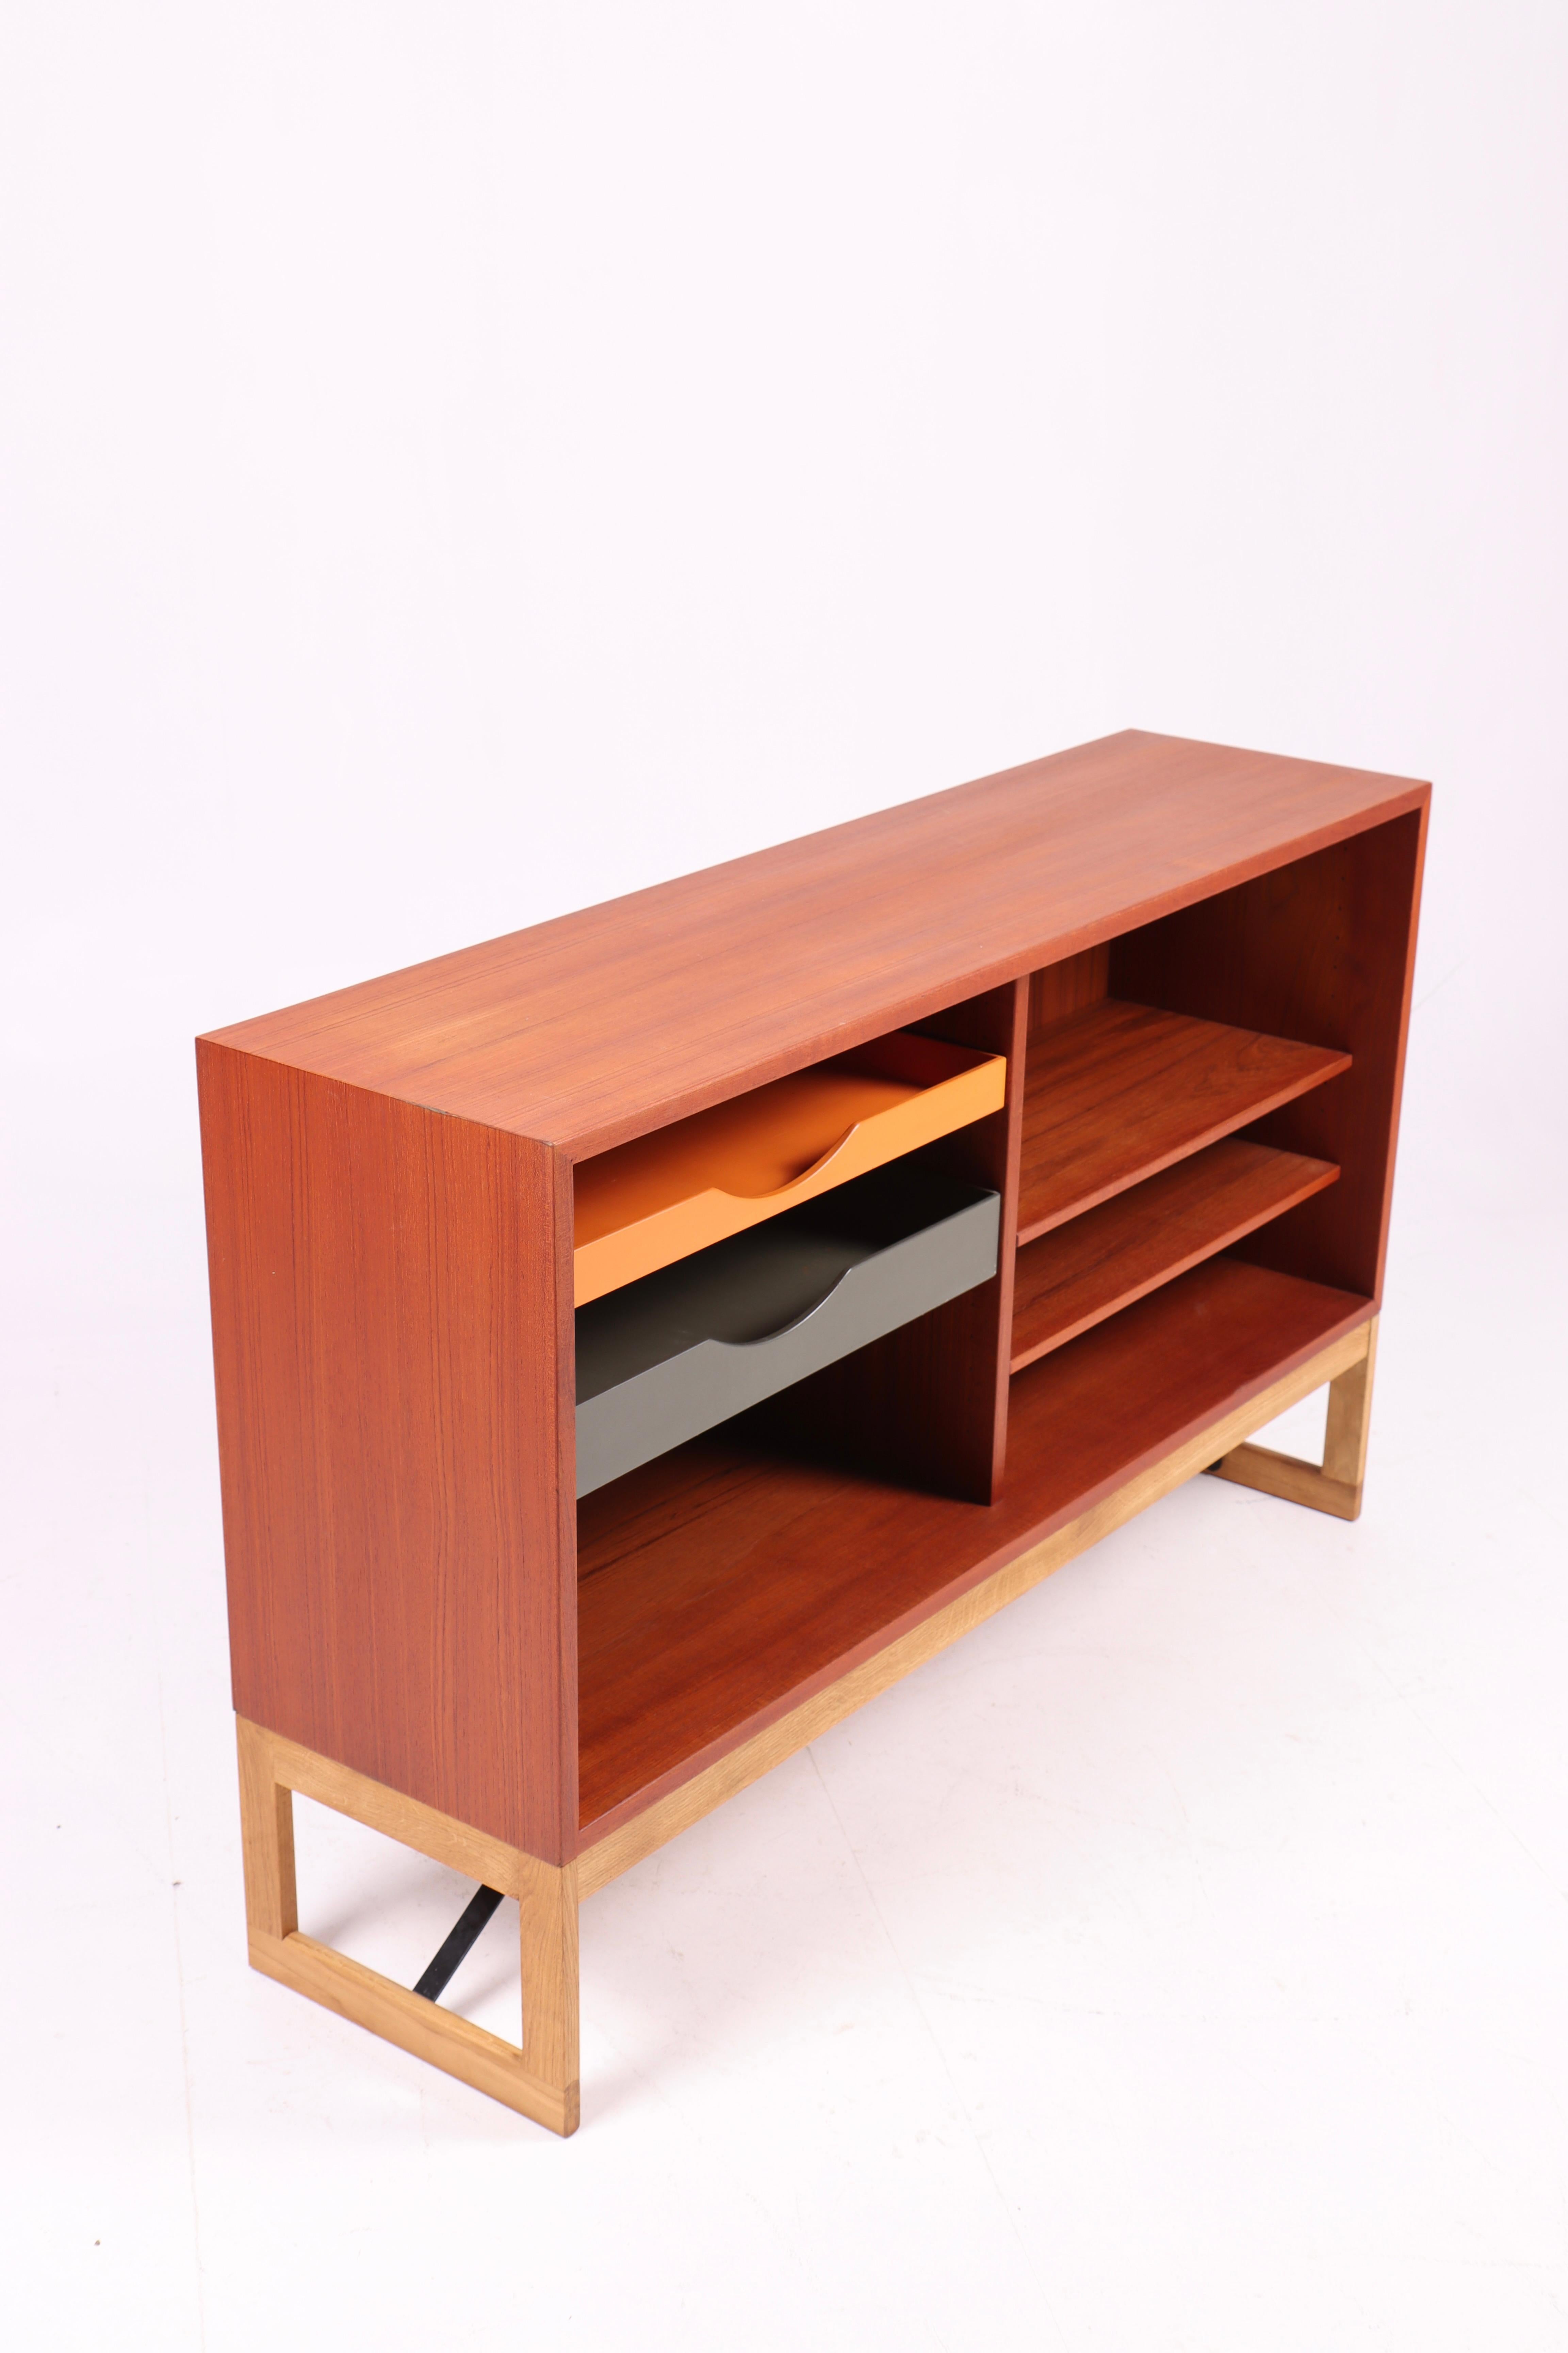 Swedish Low Midcentury Bookcase, Teak with Colored Drawers by Børge Mogensen For Sale